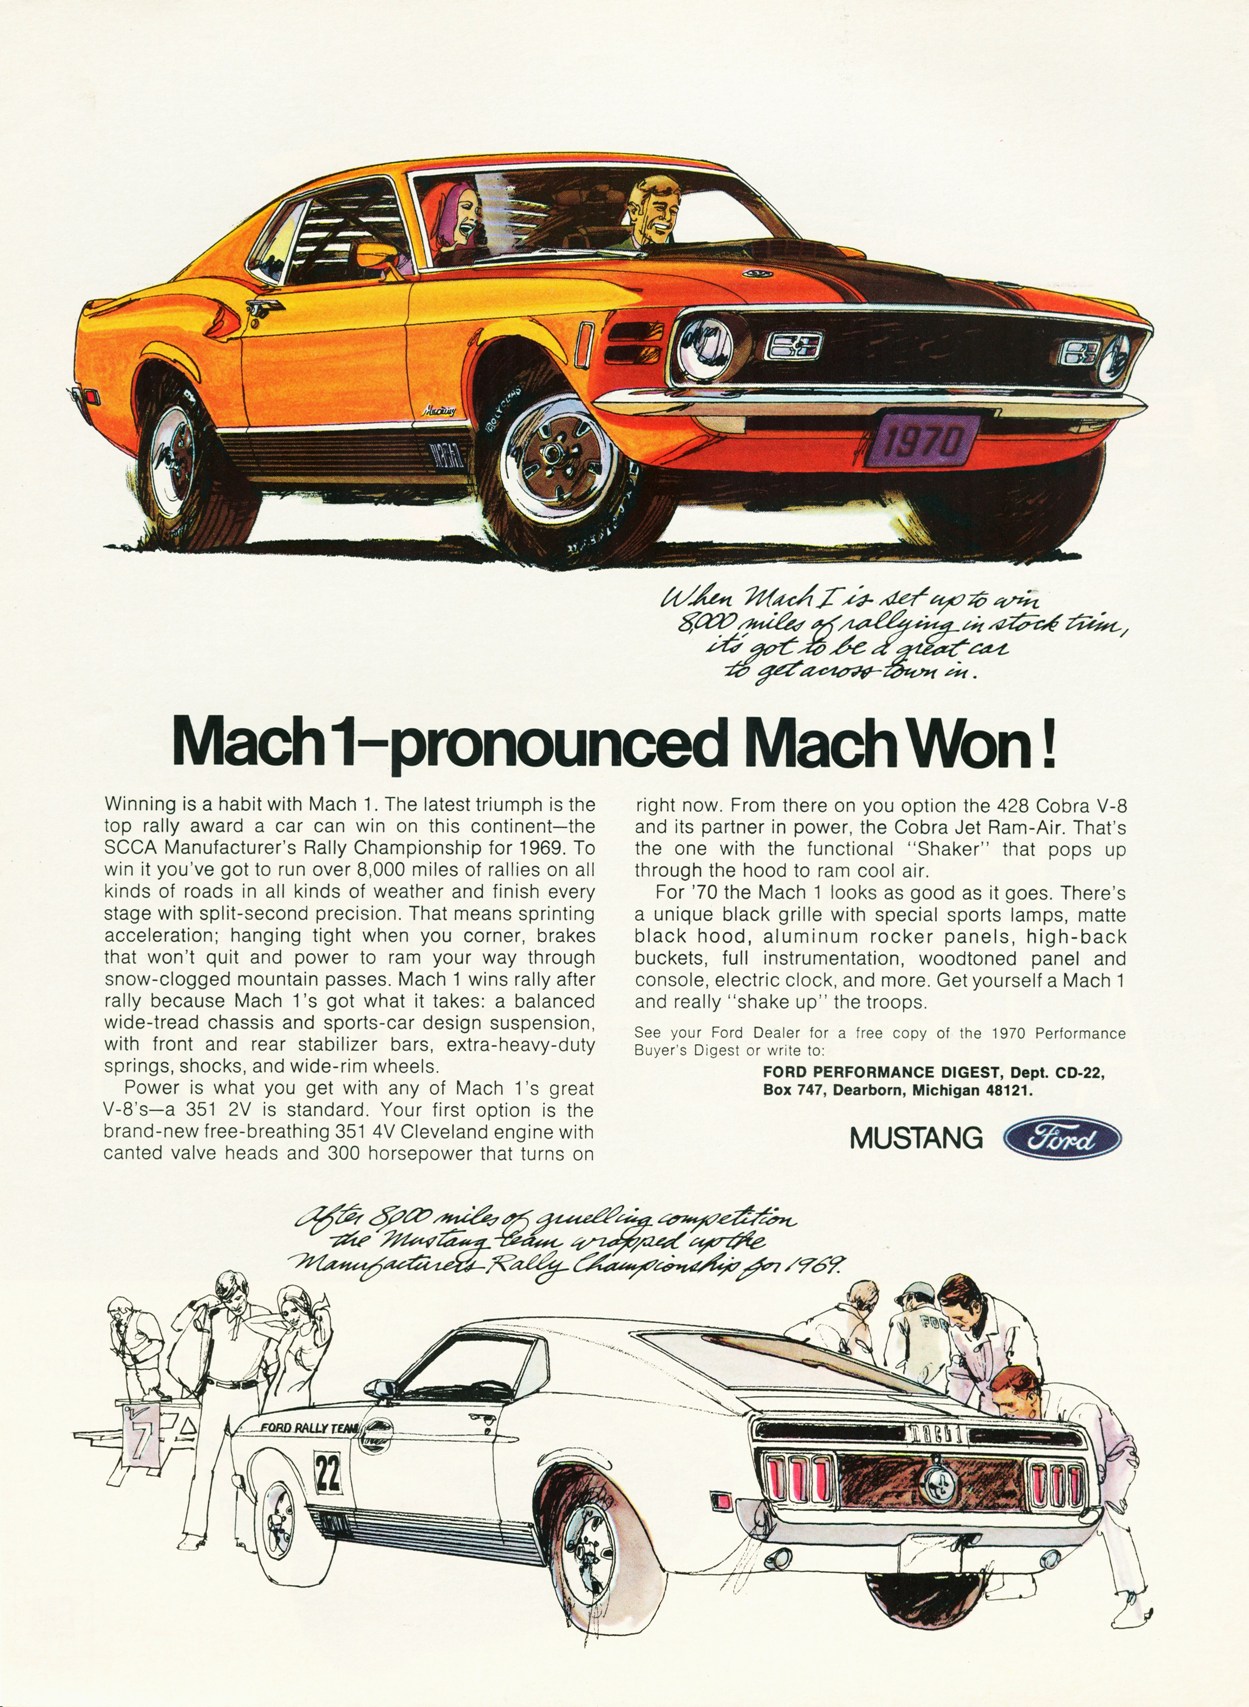 1970 Ford Mustang Ad-02